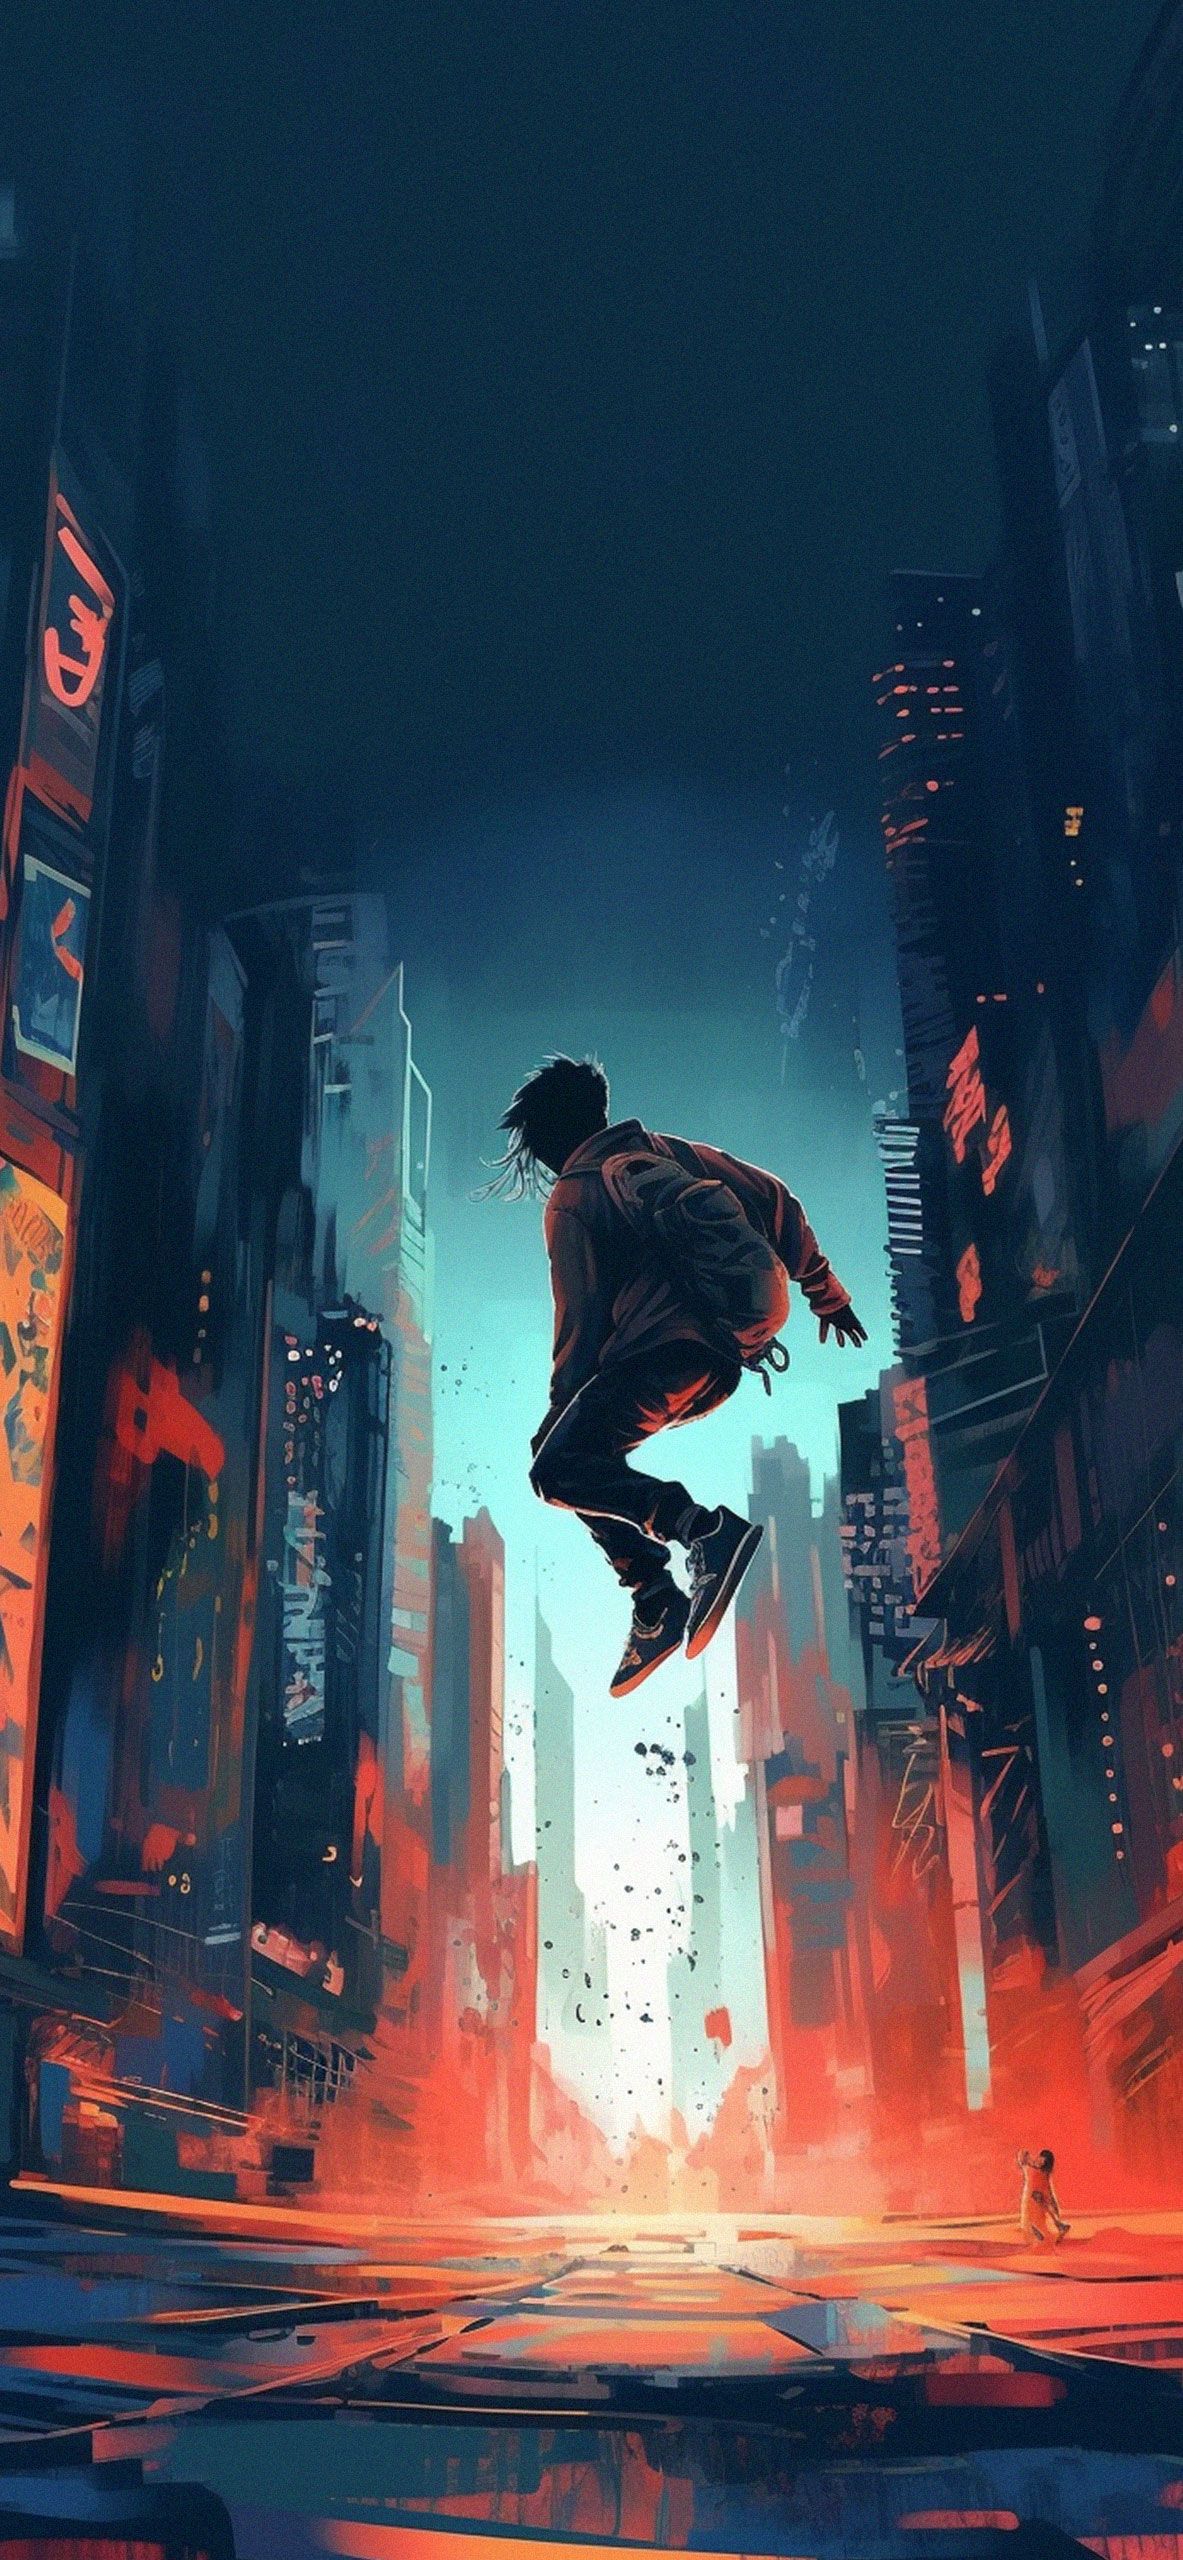 Skateboarder jumping in the air in a cityscape - Cyberpunk